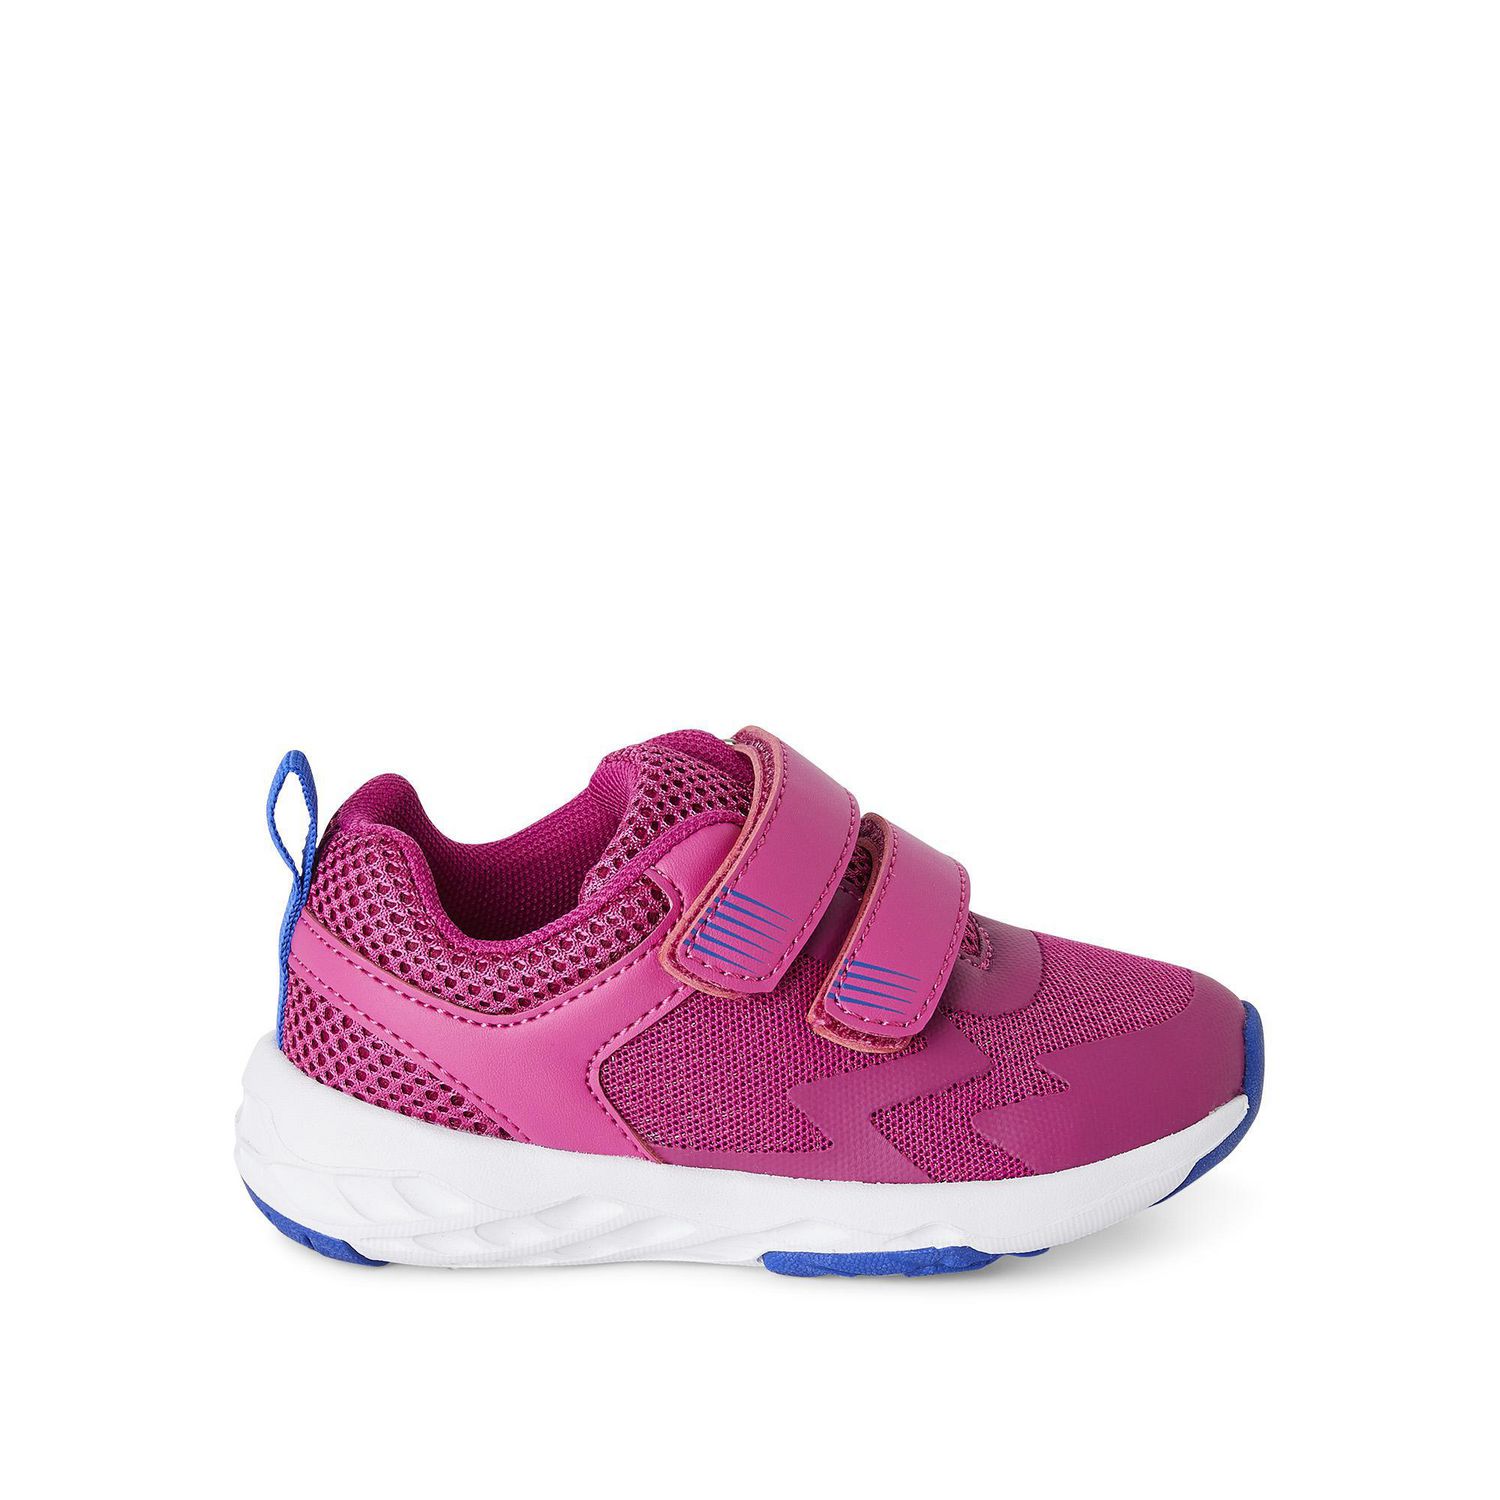 Athletic Works Toddler Girls' Ombre Sneakers | Walmart Canada